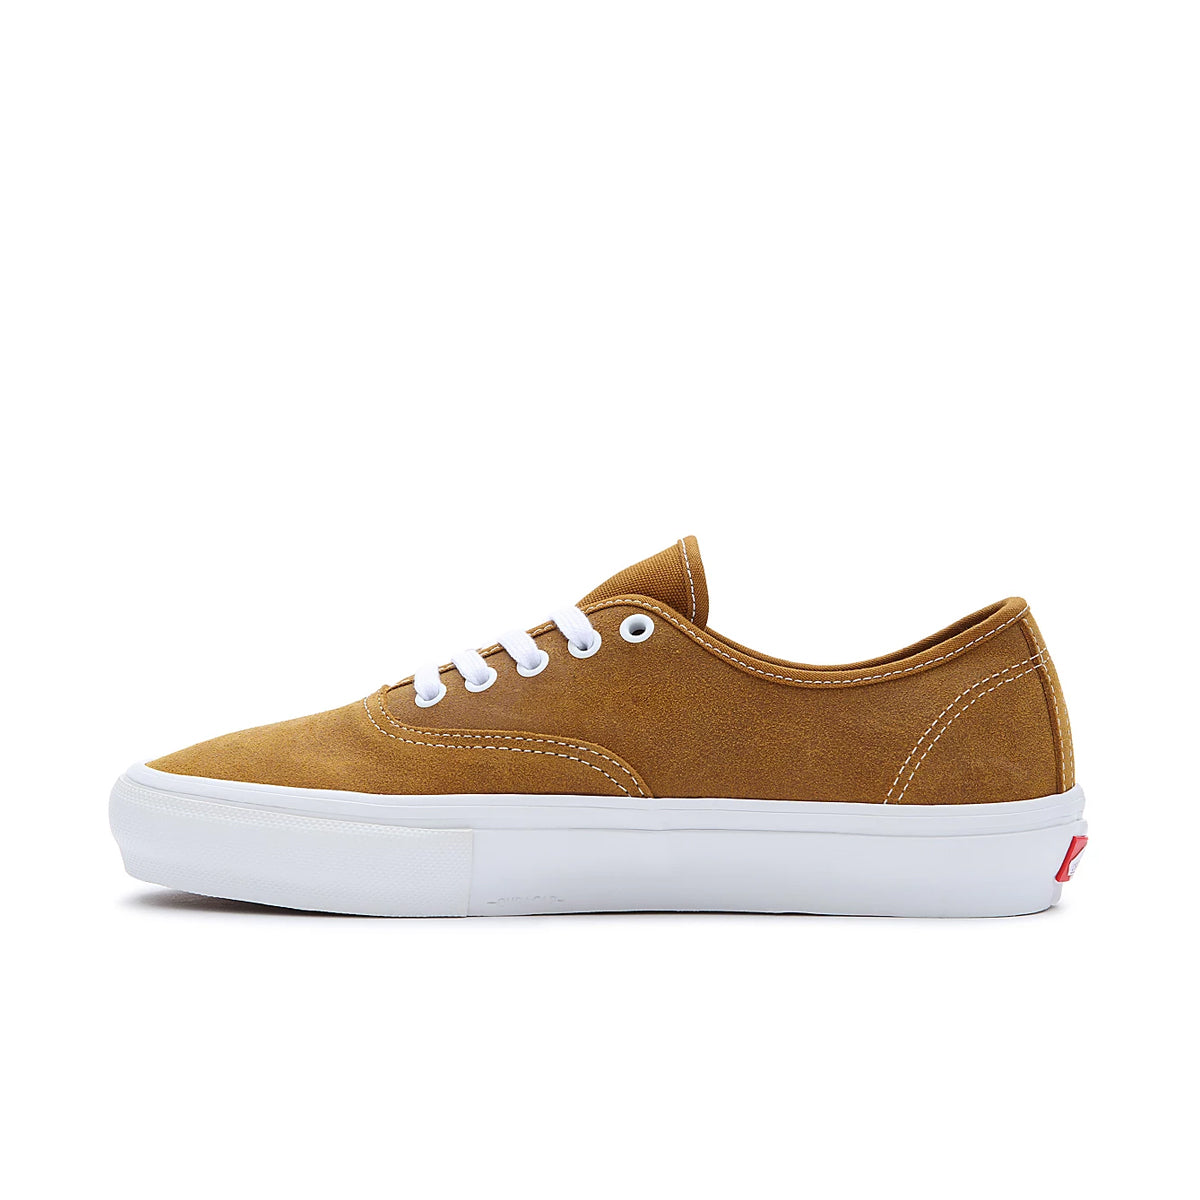 MN SKATE AUTHENTIC LEATHER GOLDEN BROWN